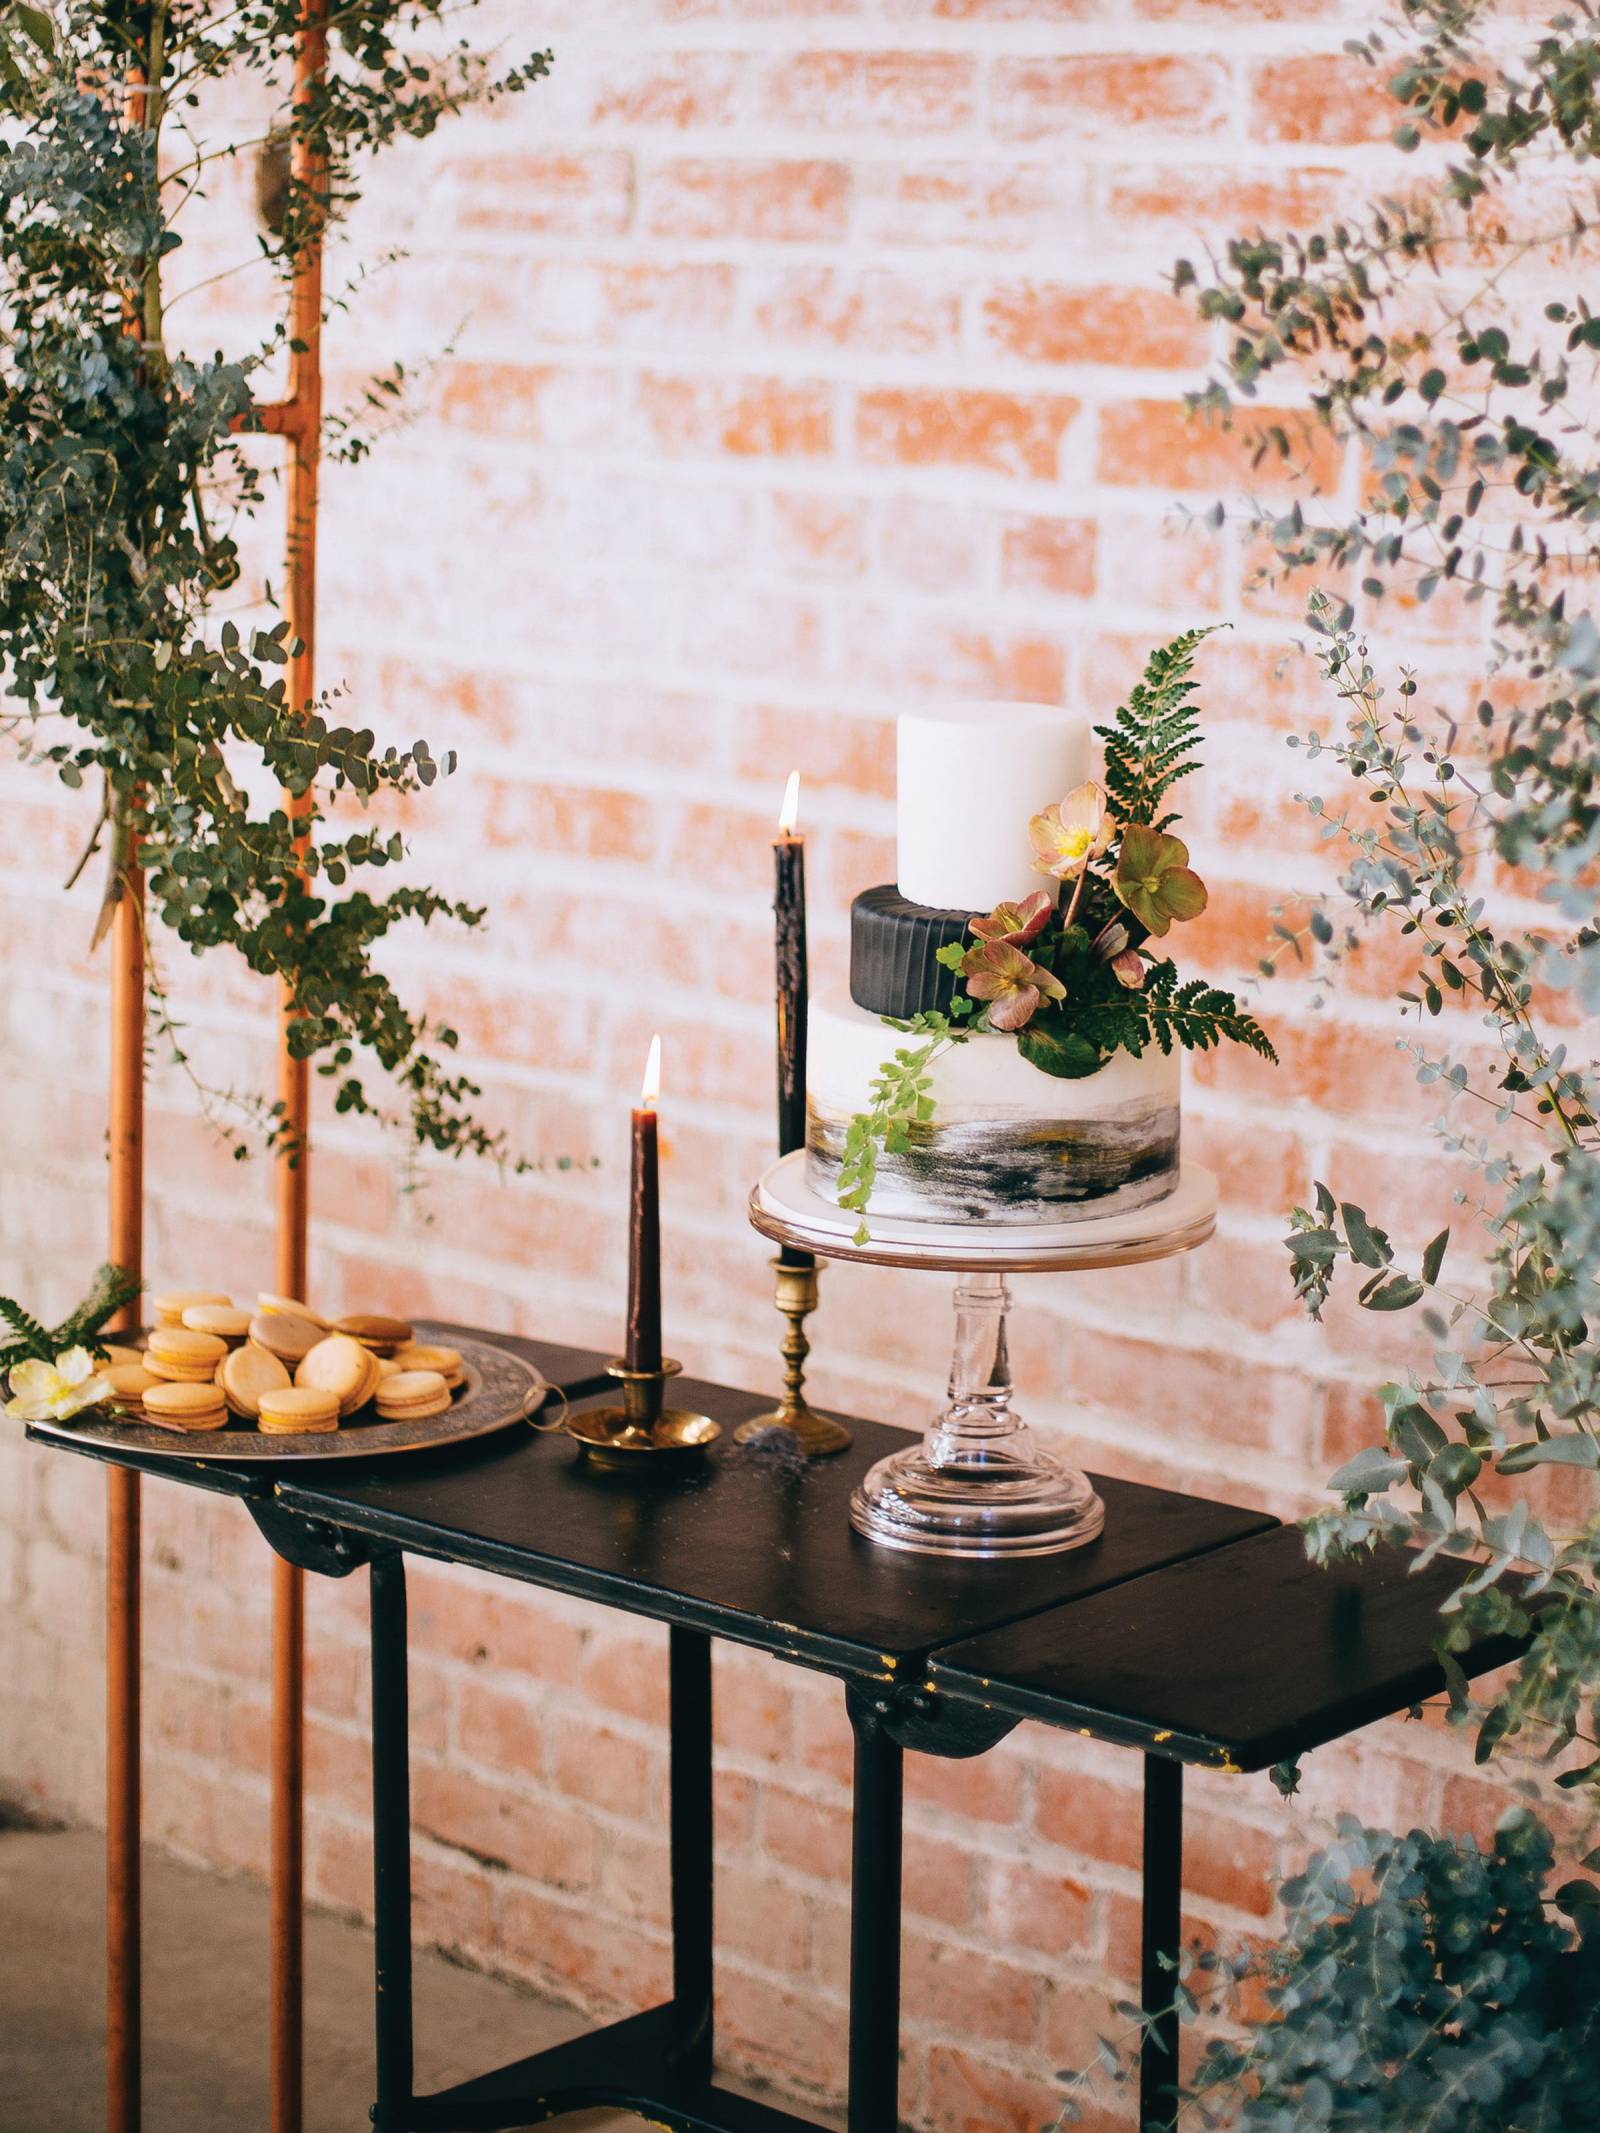 Dessert table with macarons, black and white wedding cake, tapered candles on a black side table